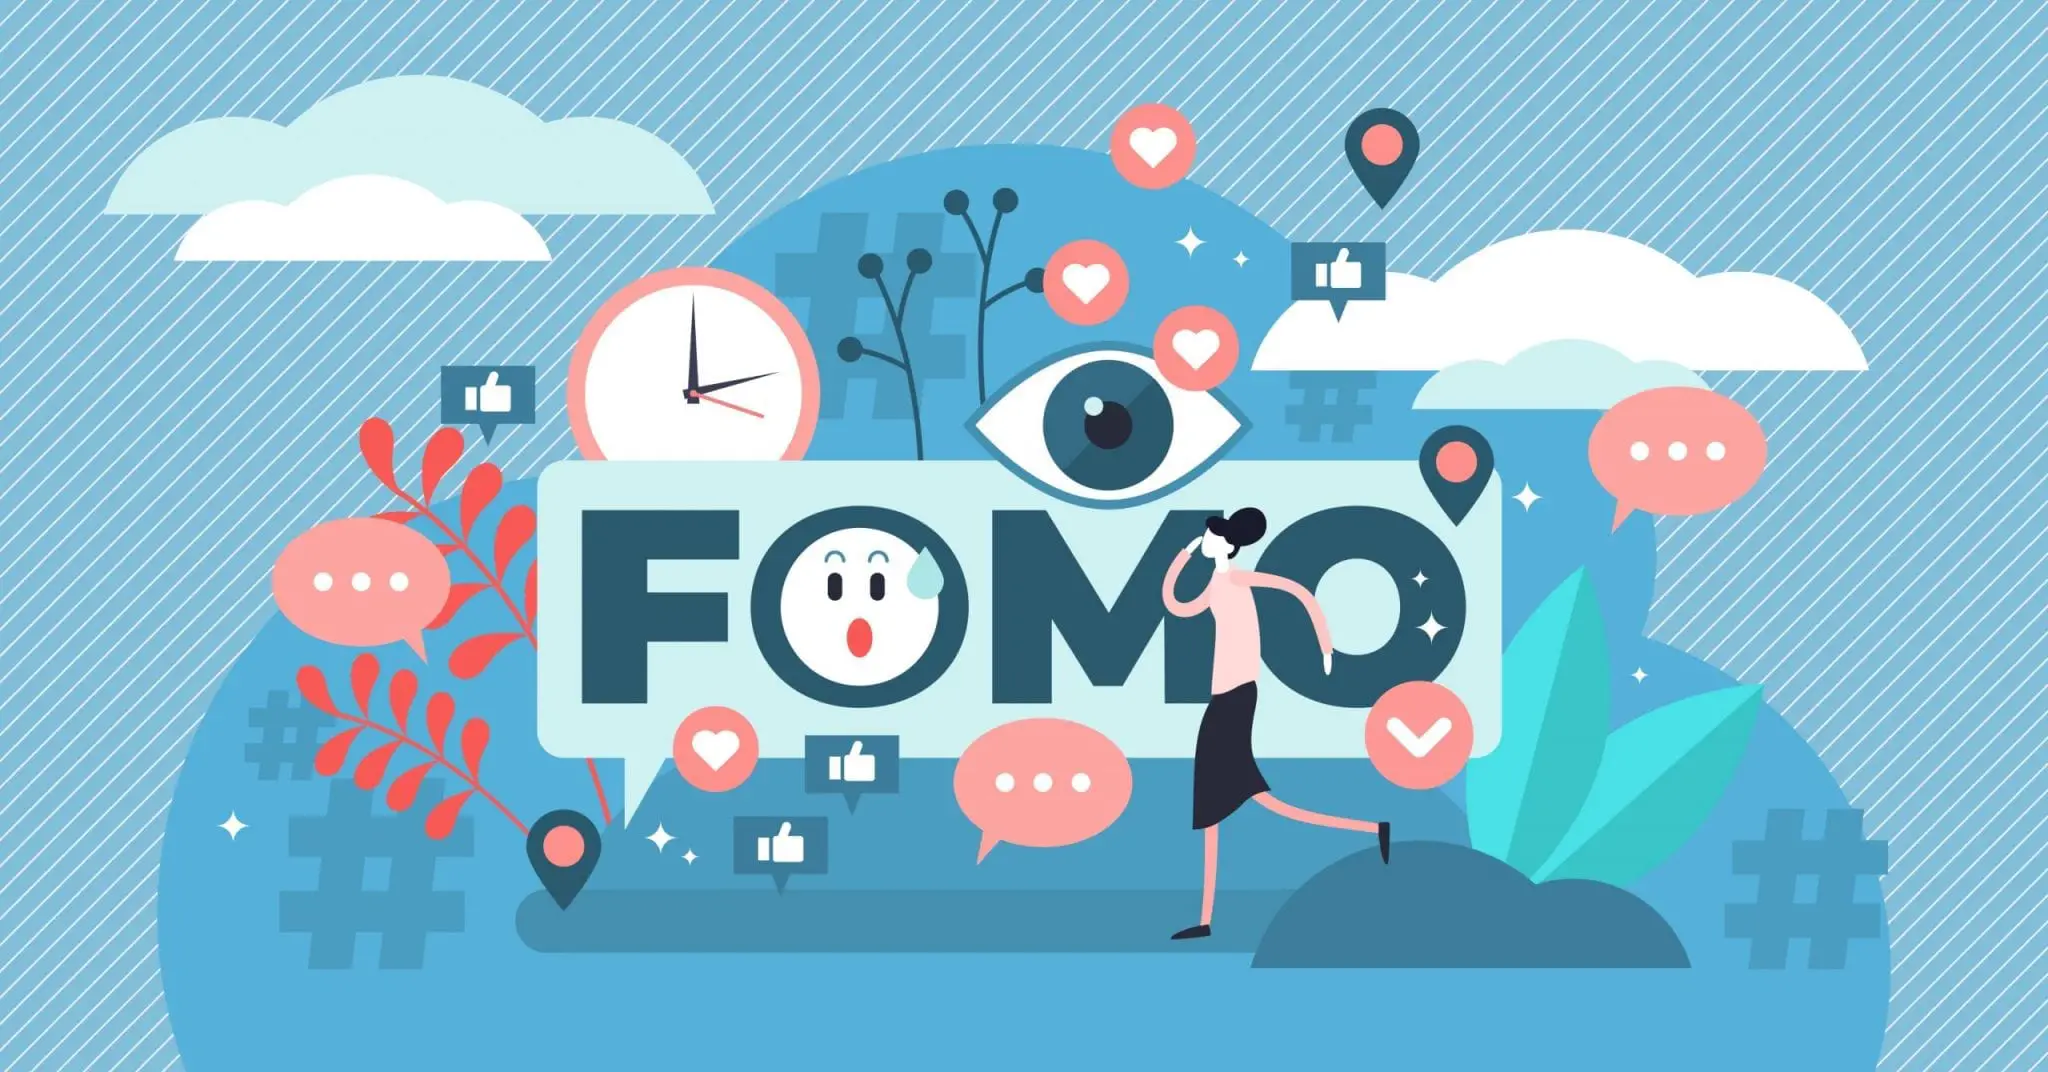 FOMO Vector Illustration, Fear of Missing Out Person Concept. Social Anxiety Cause and Symptom to Be With Pervasive Apprehension